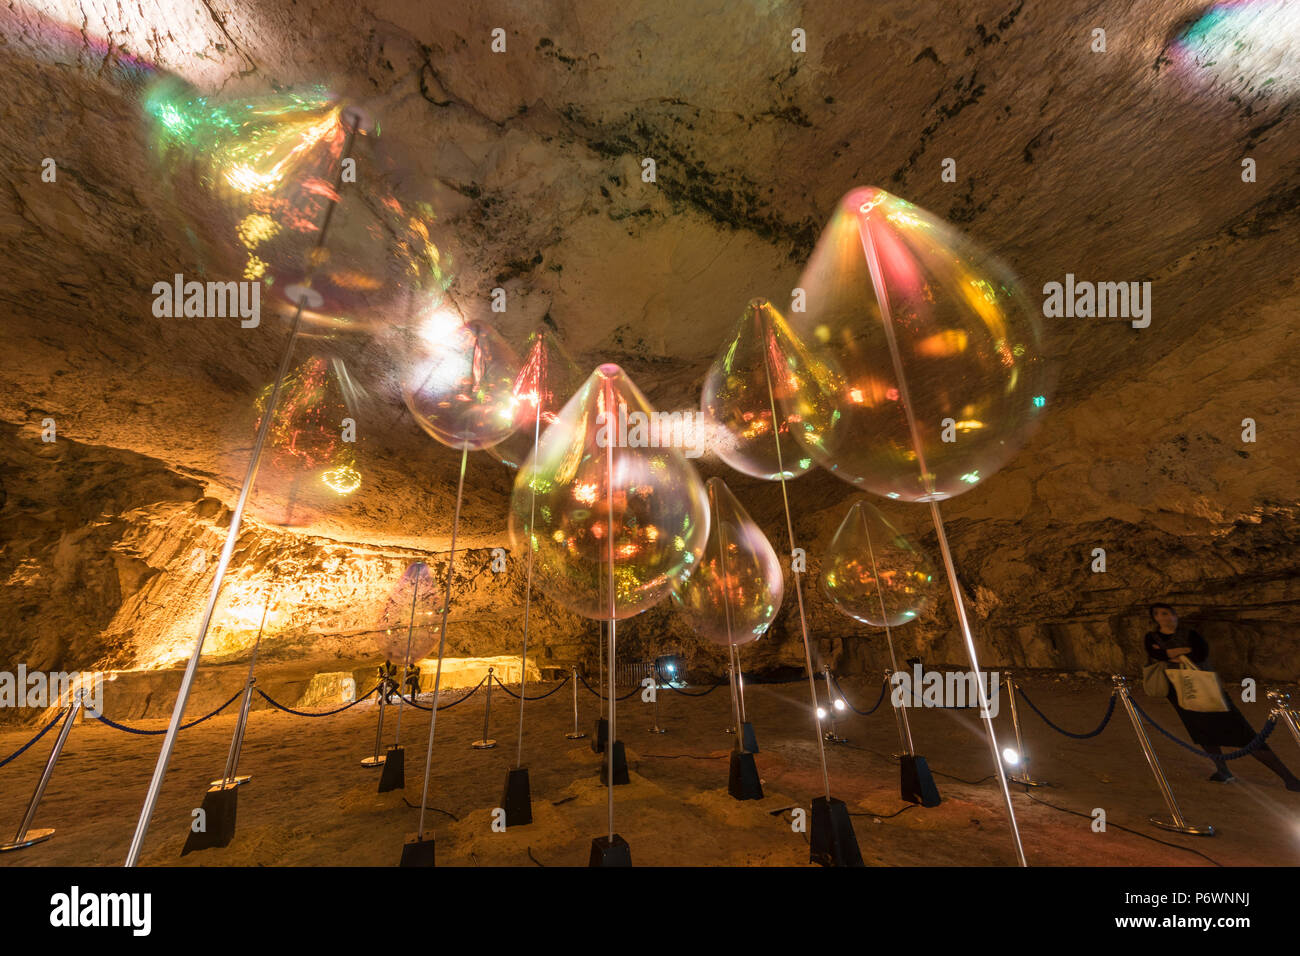 Jerusalem, Israel. 2nd July, 2018. Studio Martens & Visser 'Holons' light show at Jerusalem's Zedekia's cave during the 2018 Festival of lights. This is the 10th anniversary of the festival, festival, israel, jerusalem, Jerusalem. The Festival of Lights in the Old city, jewish, which draws hundreds of thousands of visitors to the old city of Jerusalem, which is lit by many light sculptures and shows Credit: Yagil Henkin/Alamy Live News Stock Photo